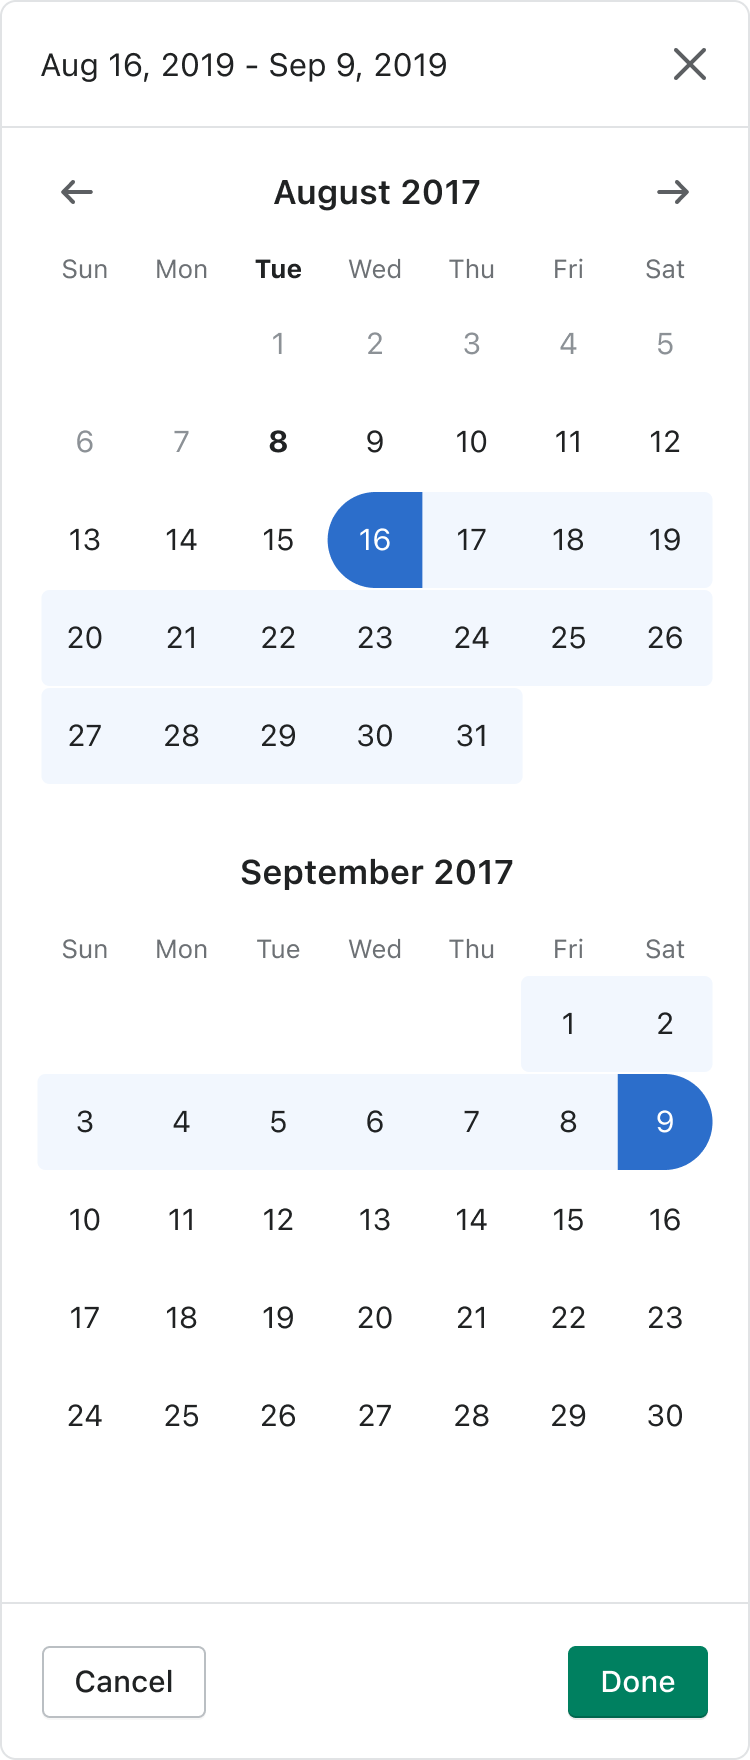 datepicker with done button